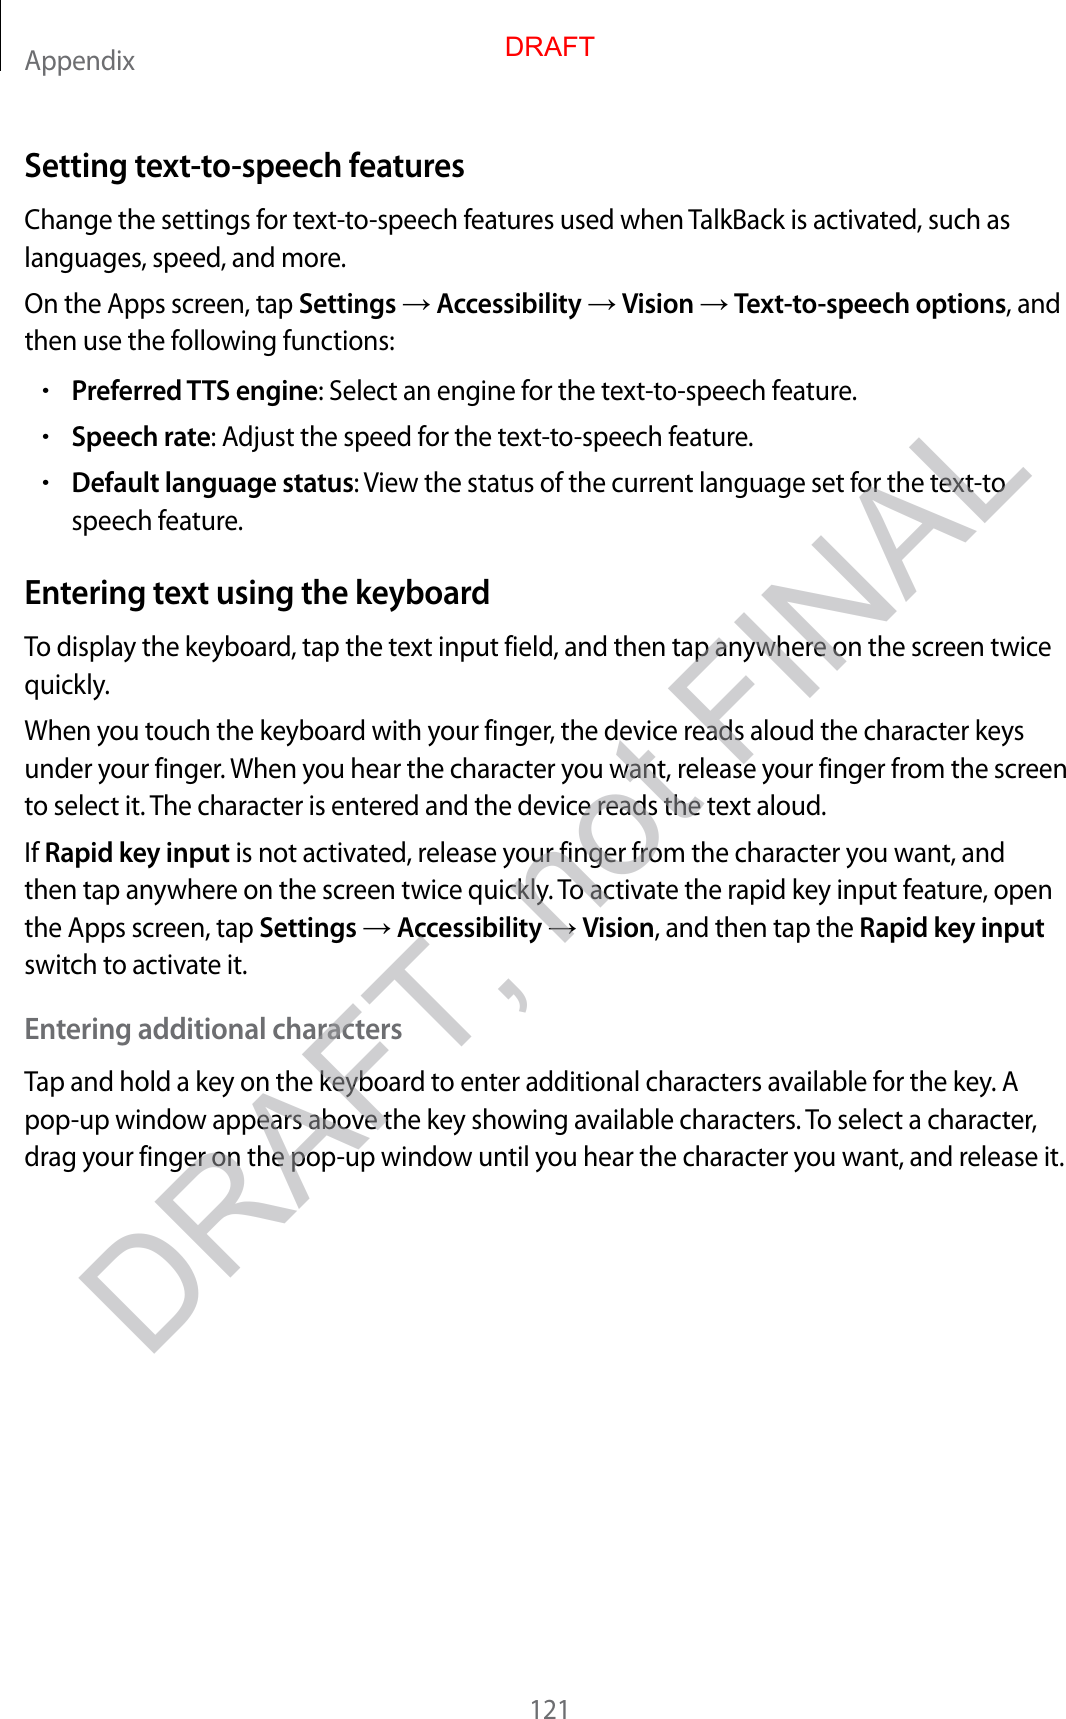 Appendix121Setting text-to-speech featur esChange the settings for t ext-to-speech featur es used when TalkBack is activated , such as languages, speed , and mor e .On the Apps screen, tap Settings  Accessibility  Vision  Text-to-speech options, and then use the follo wing functions:•Preferred TTS engine: Select an engine f or the t ext-to-speech featur e .•Speech rat e: Adjust the speed f or the t ext-to-speech featur e .•Default language status: View the status of the curr ent language set for the text-to speech featur e.Entering t e xt using the keyboardTo display the keyboar d , tap the text input field, and then tap an ywhere on the scr een twice quickly.When you t ouch the keyboar d with y our finger, the device reads aloud the character keys under your finger. When you hear the character you wan t, r elease y our finger fr om the scr een to select it. The character is enter ed and the devic e r eads the te xt aloud.If Rapid key input is not activated, r elease y our finger fr om the character y ou want , and then tap anywhere on the scr een twice quickly. To activat e the rapid key input f ea tur e , open the Apps screen, tap Settings  Accessibility  Vision, and then tap the Rapid key input switch to activate it.Entering additional char actersTap and hold a key on the keyboard to ent er additional characters av ailable f or the key. A pop-up window appears above the key showing a v ailable characters. To select a character, drag your finger on the pop-up window until y ou hear the character y ou want , and r elease it.DRAFTDRAFT, not FINAL